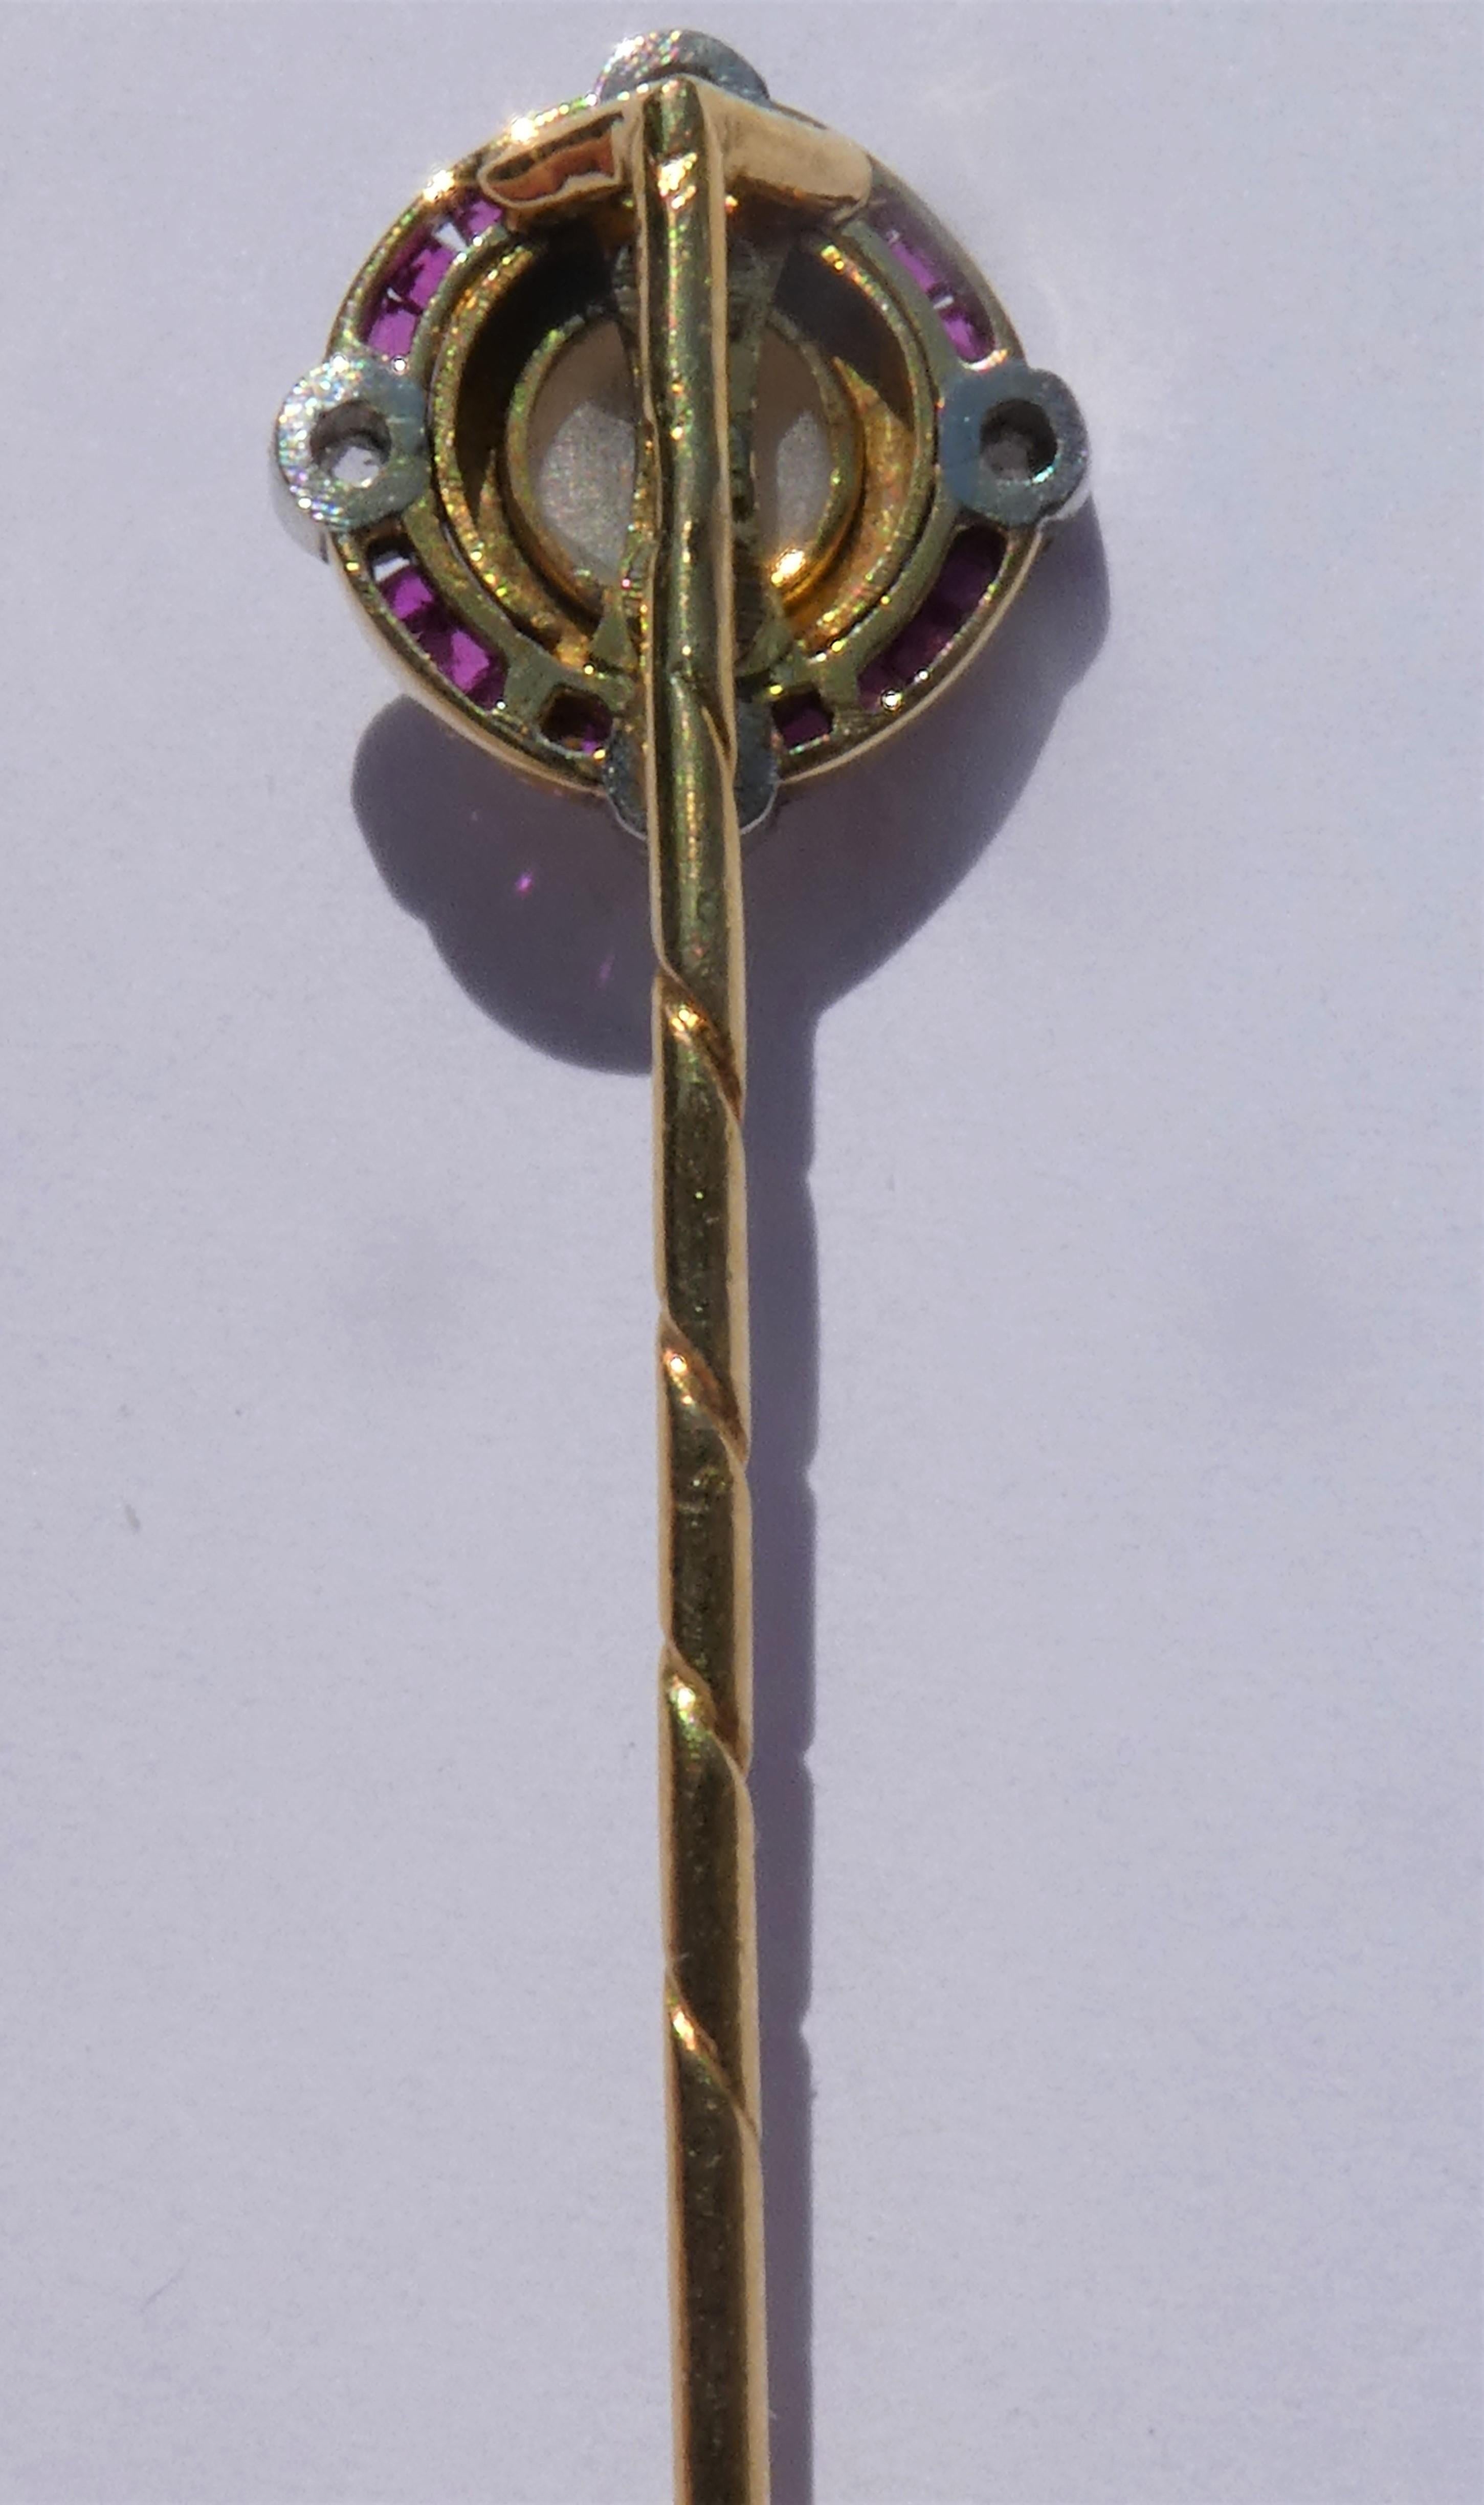 The center of this stickpin features a round small cream white colour shell cameo with an intricately carved image of a lady in profile. The pin was crafted circa 1910 in Europe in 18 karat gold. Around the cameo there is a gold setting with